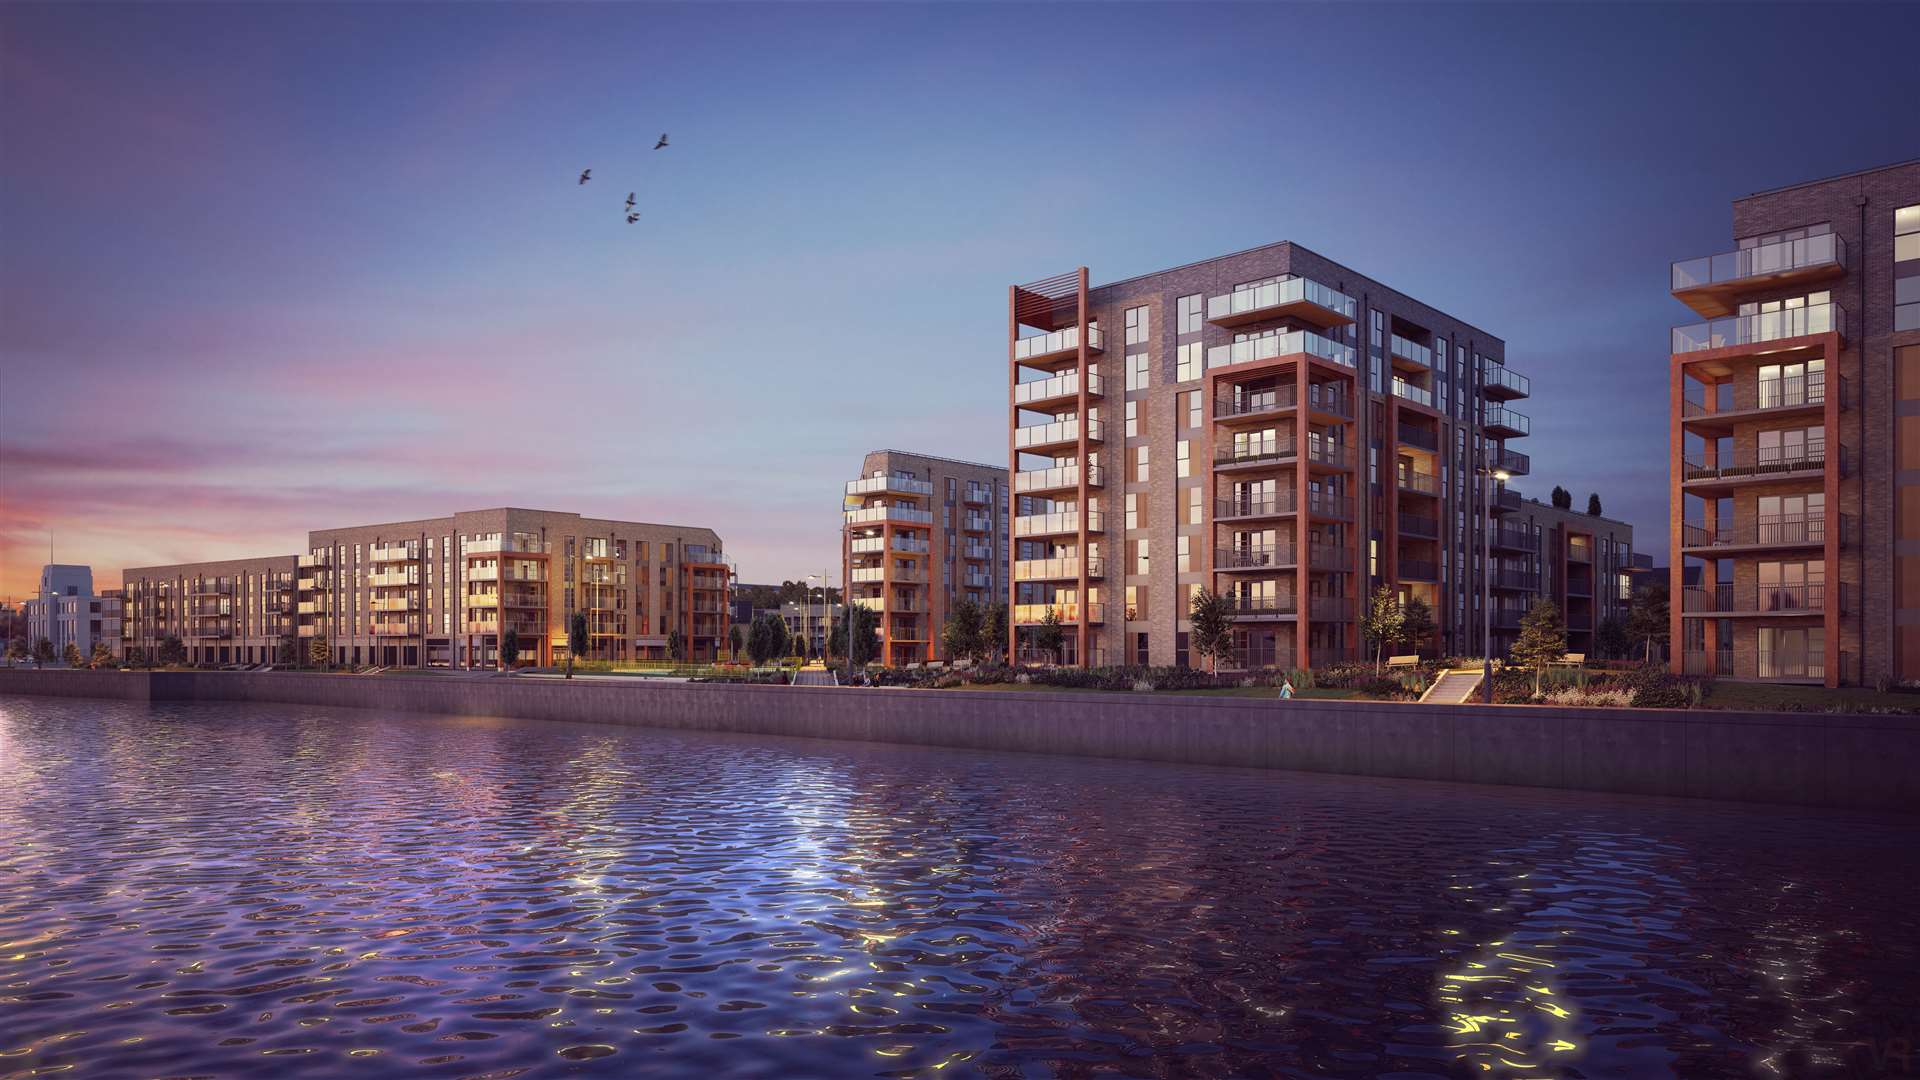 How the Thameside development will look when complete